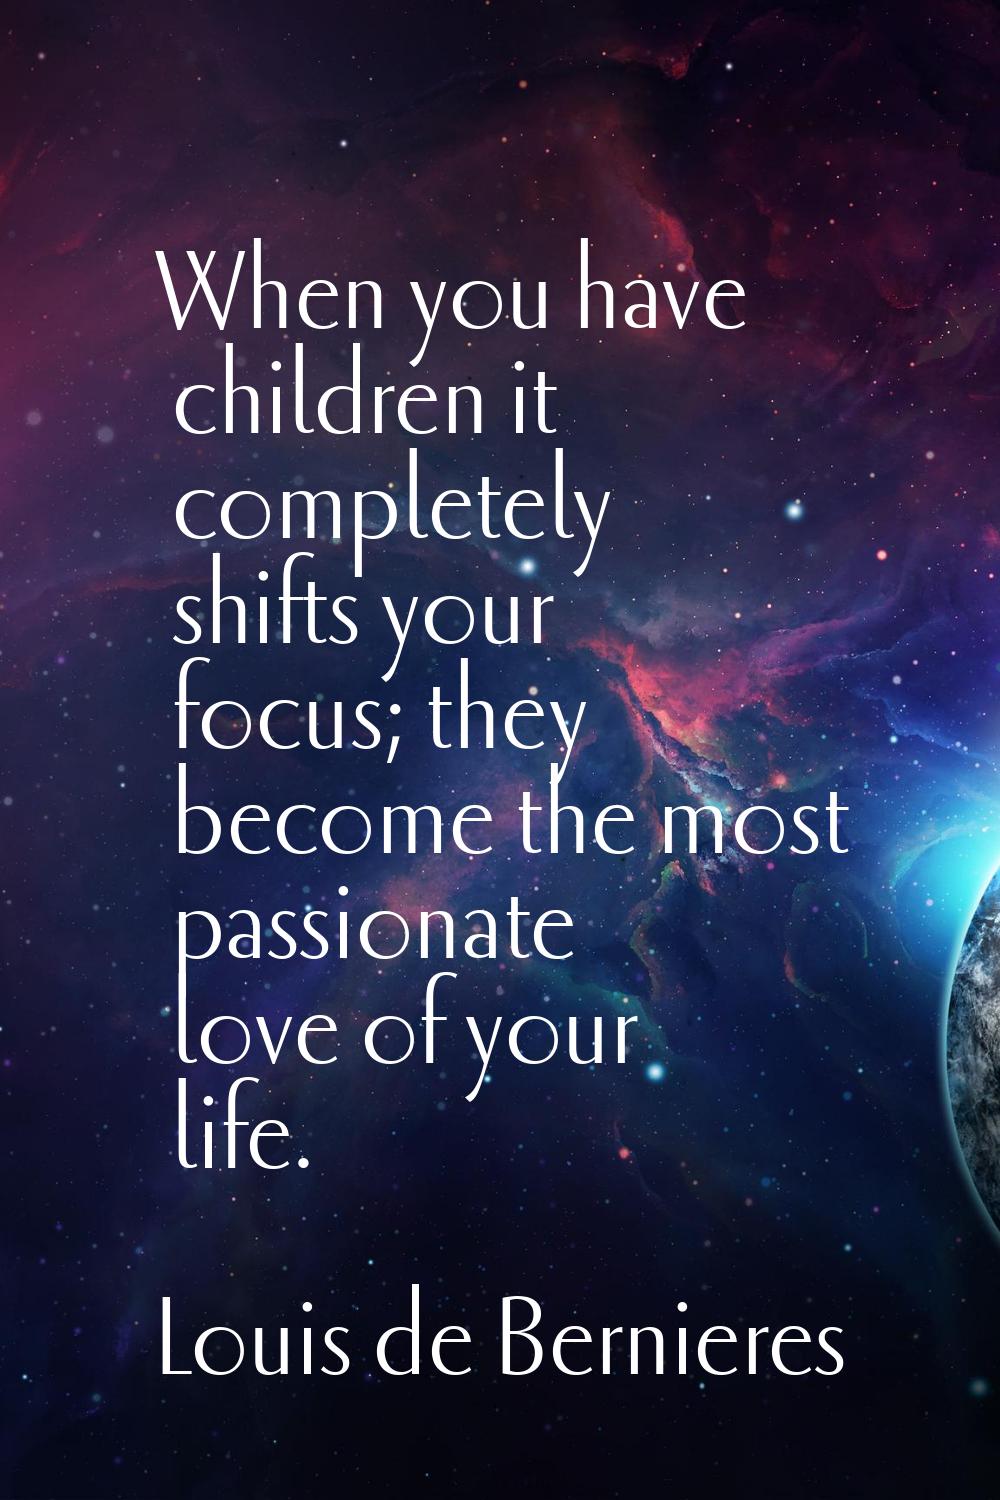 When you have children it completely shifts your focus; they become the most passionate love of you